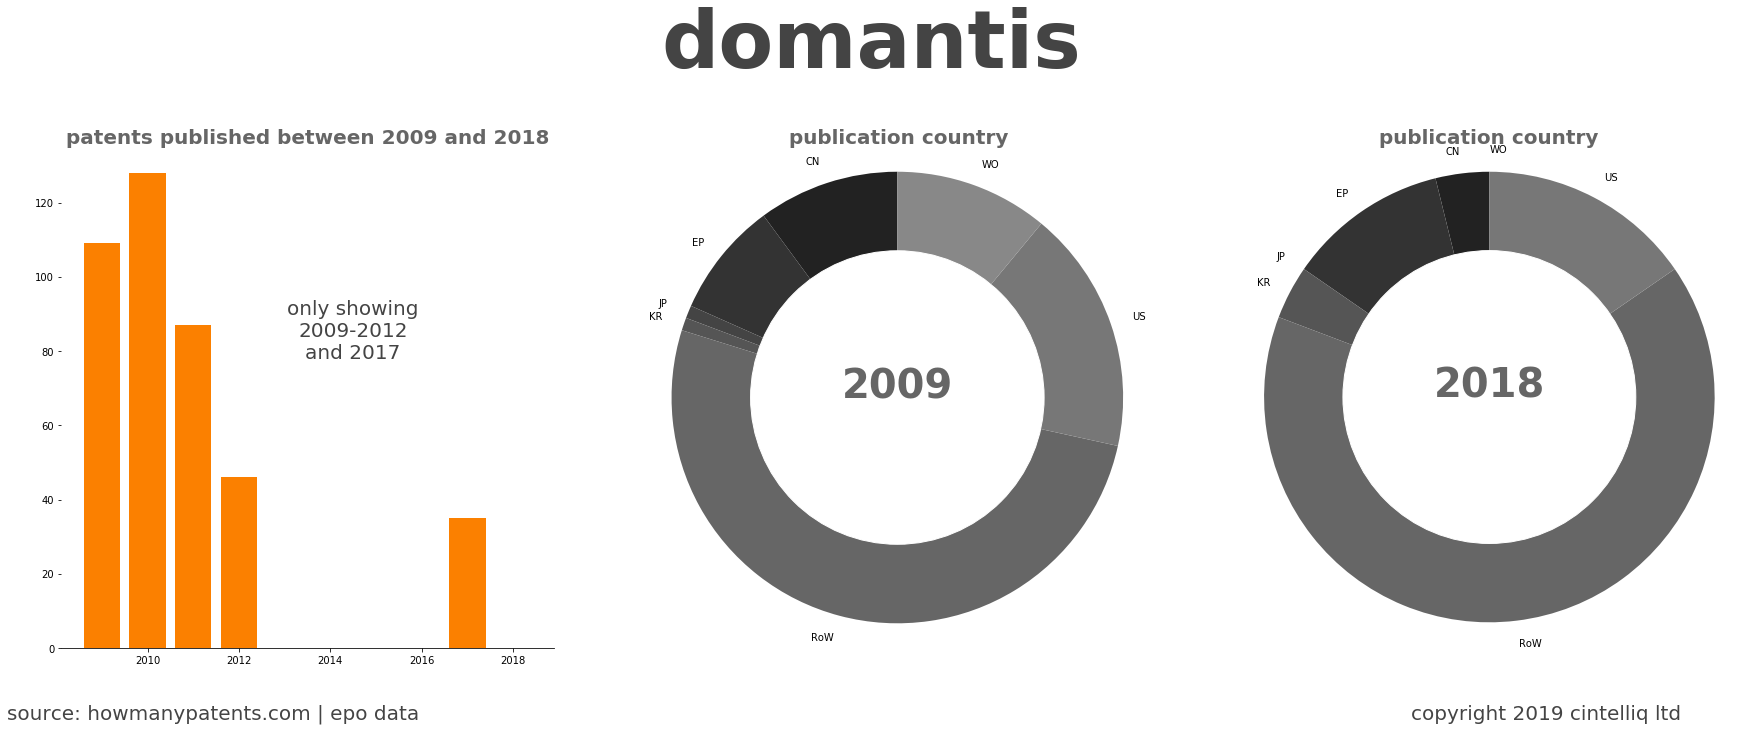 summary of patents for Domantis